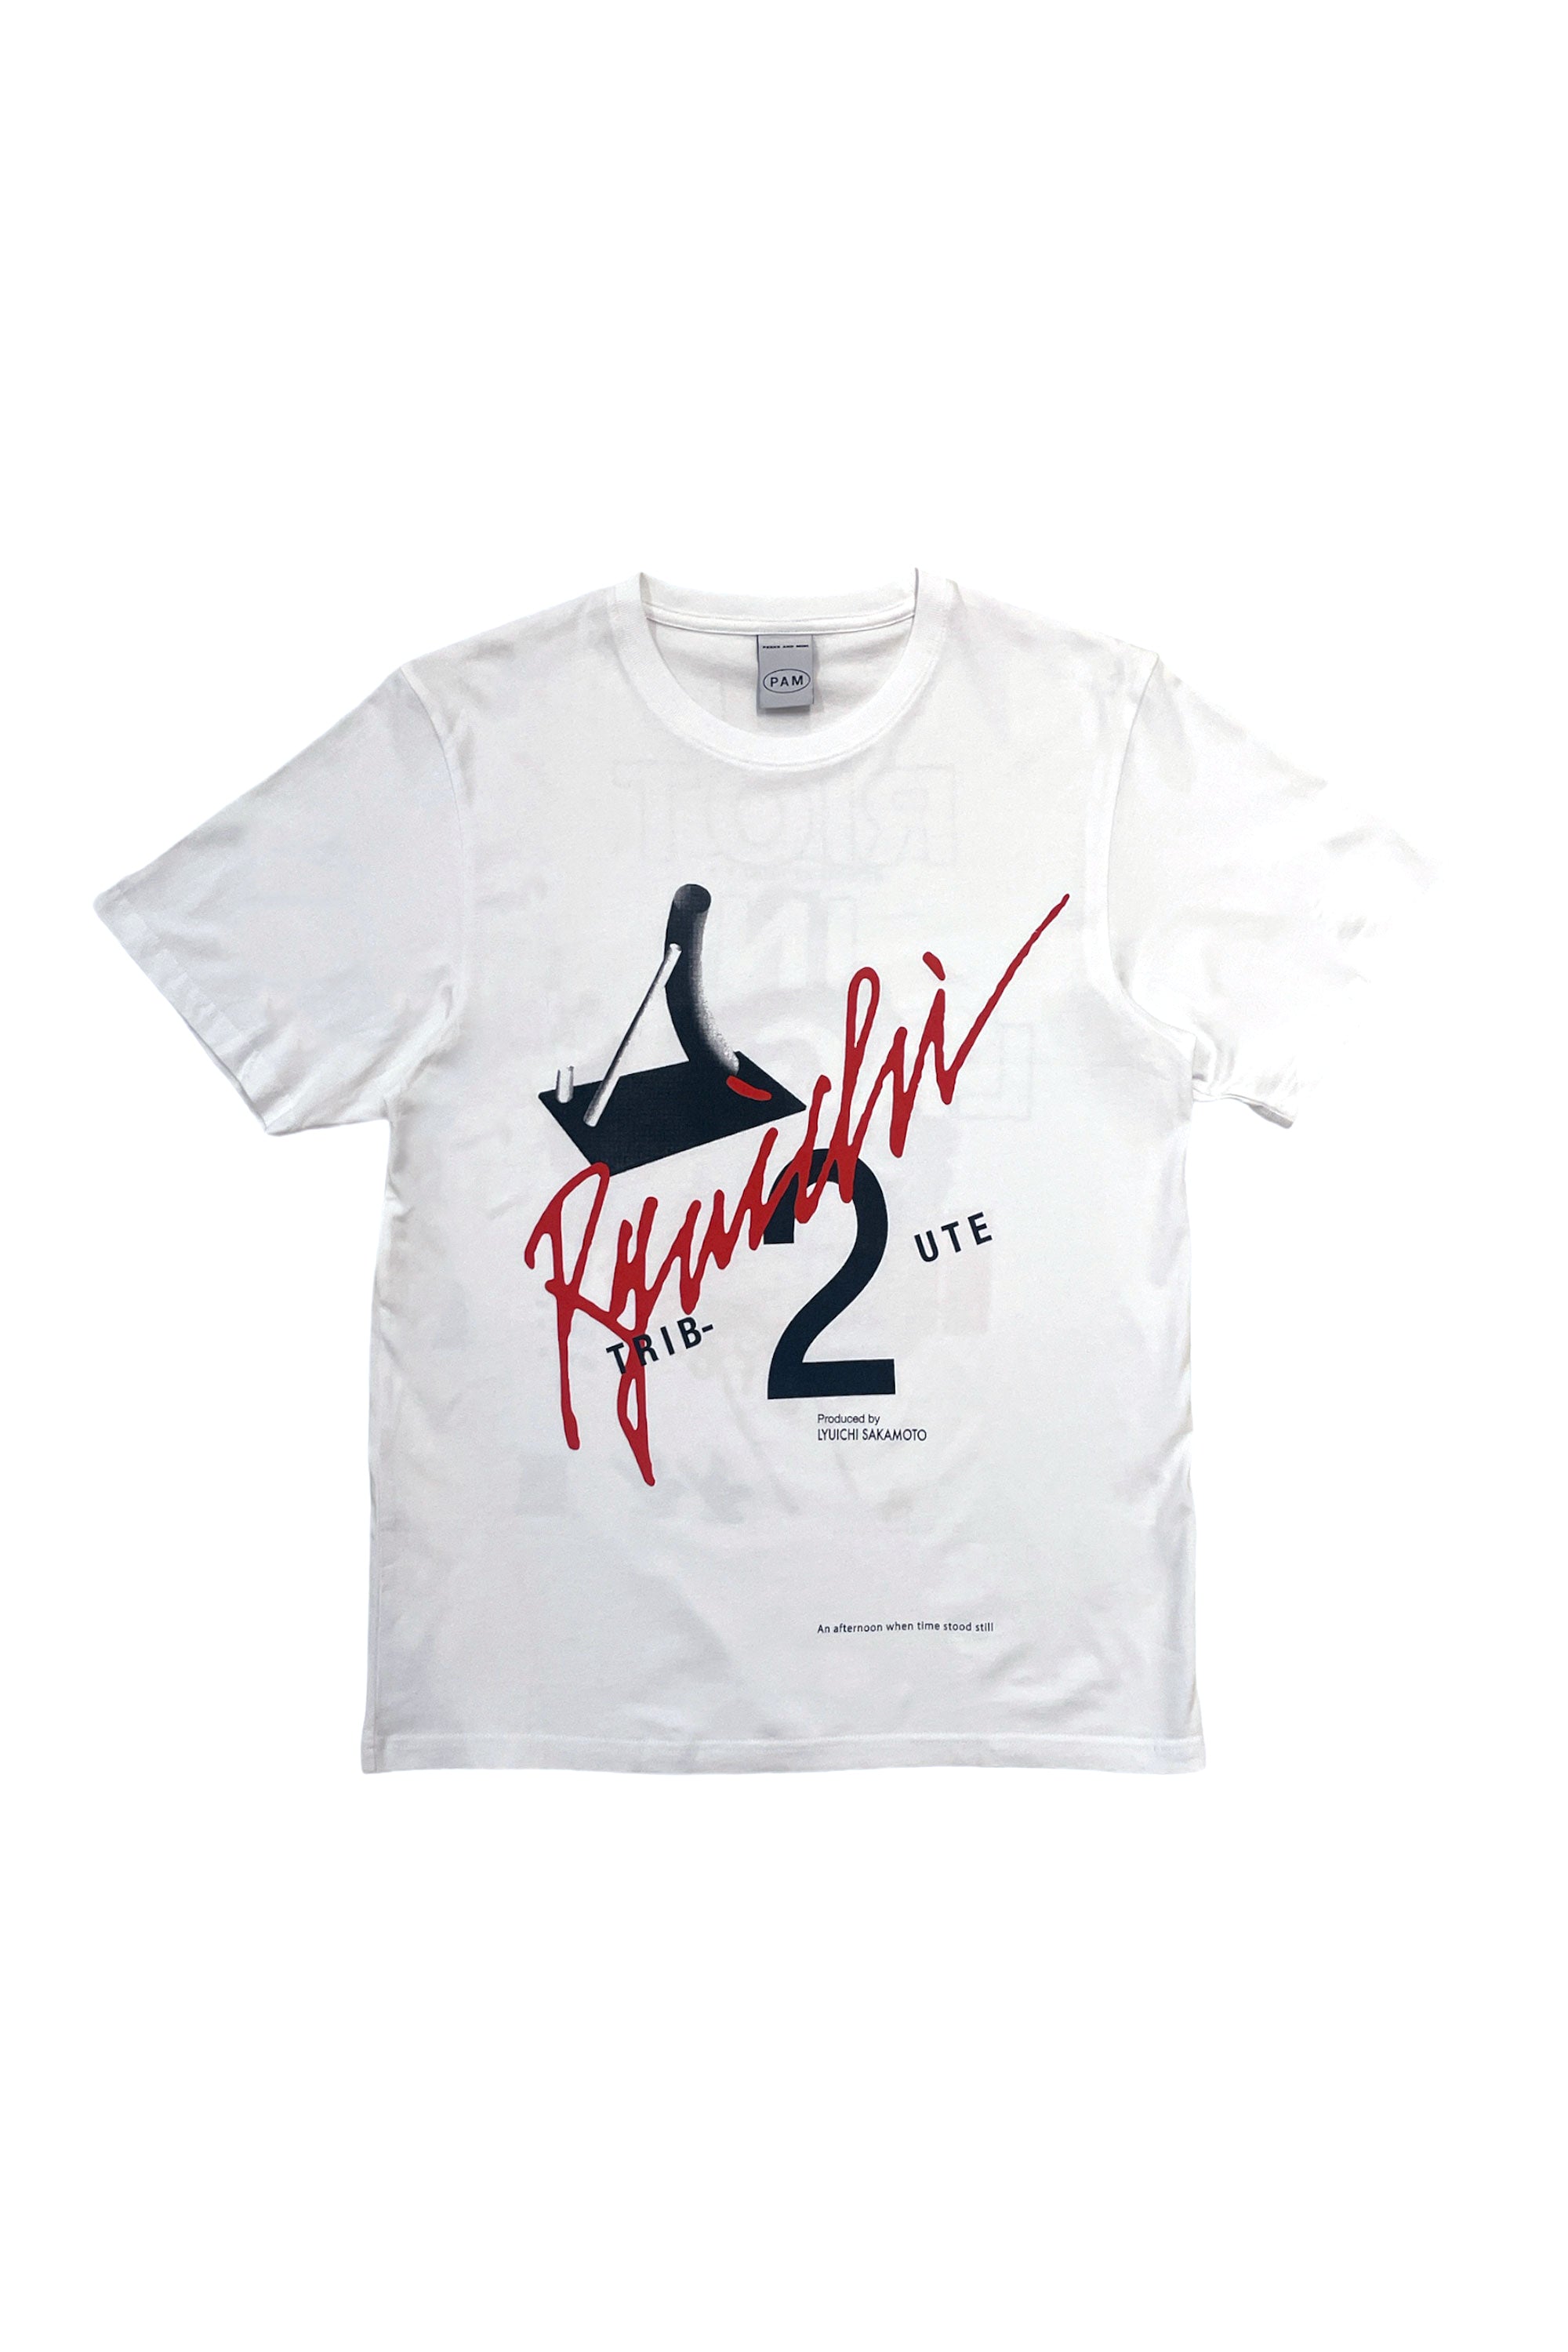 The PAMMIX029 - NERVES KNIVES TEE  available online with global shipping, and in PAM Stores Melbourne and Sydney.